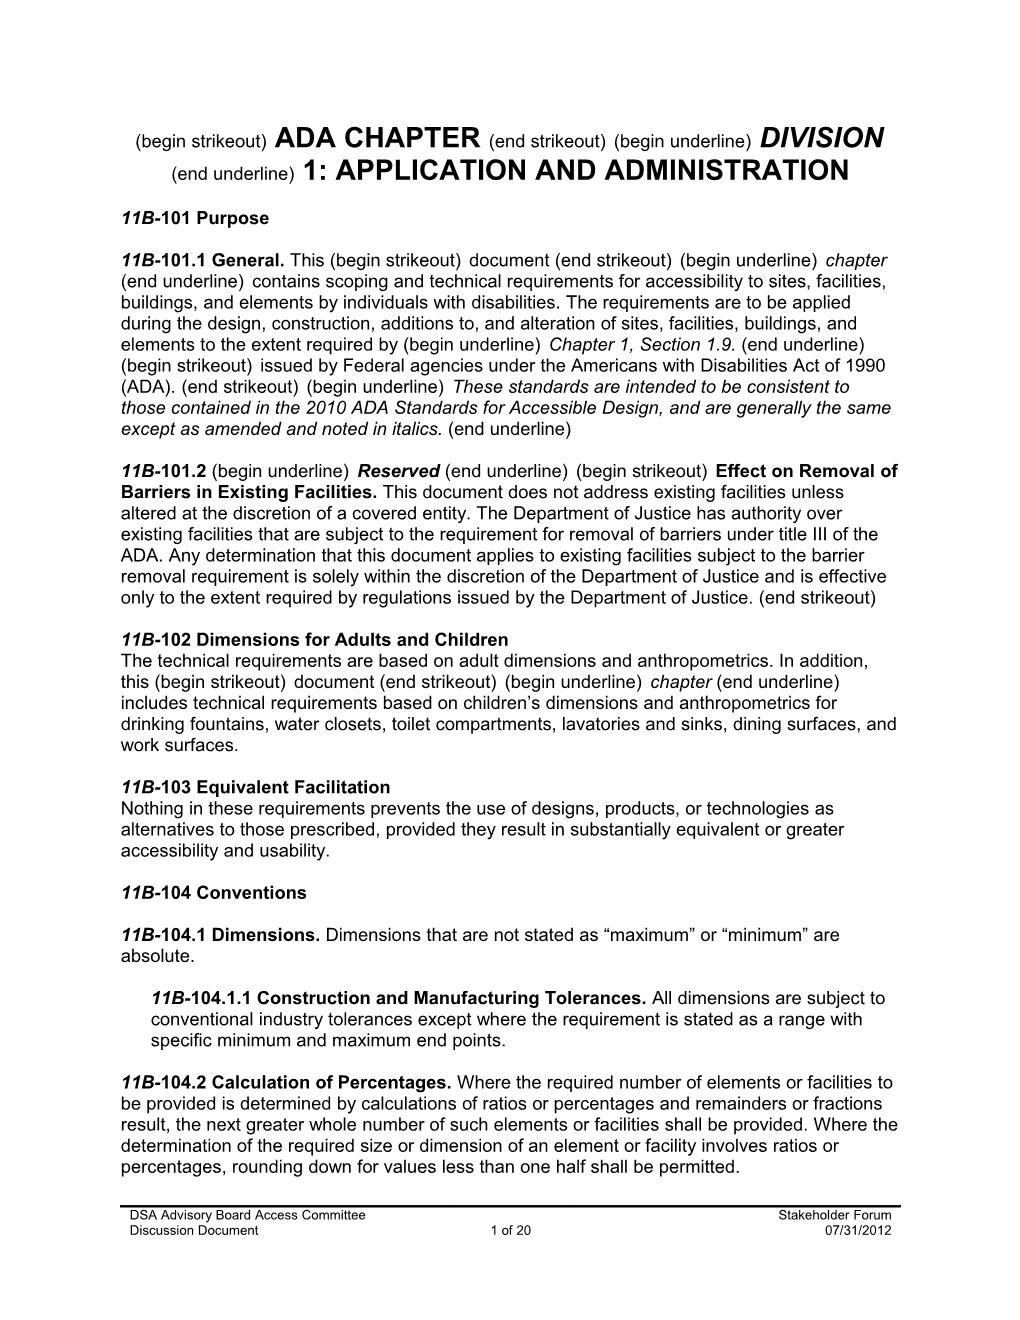 2013 CBC Chapter 11B - Division 1: Application and Administration (Strikeout/Underline Version)